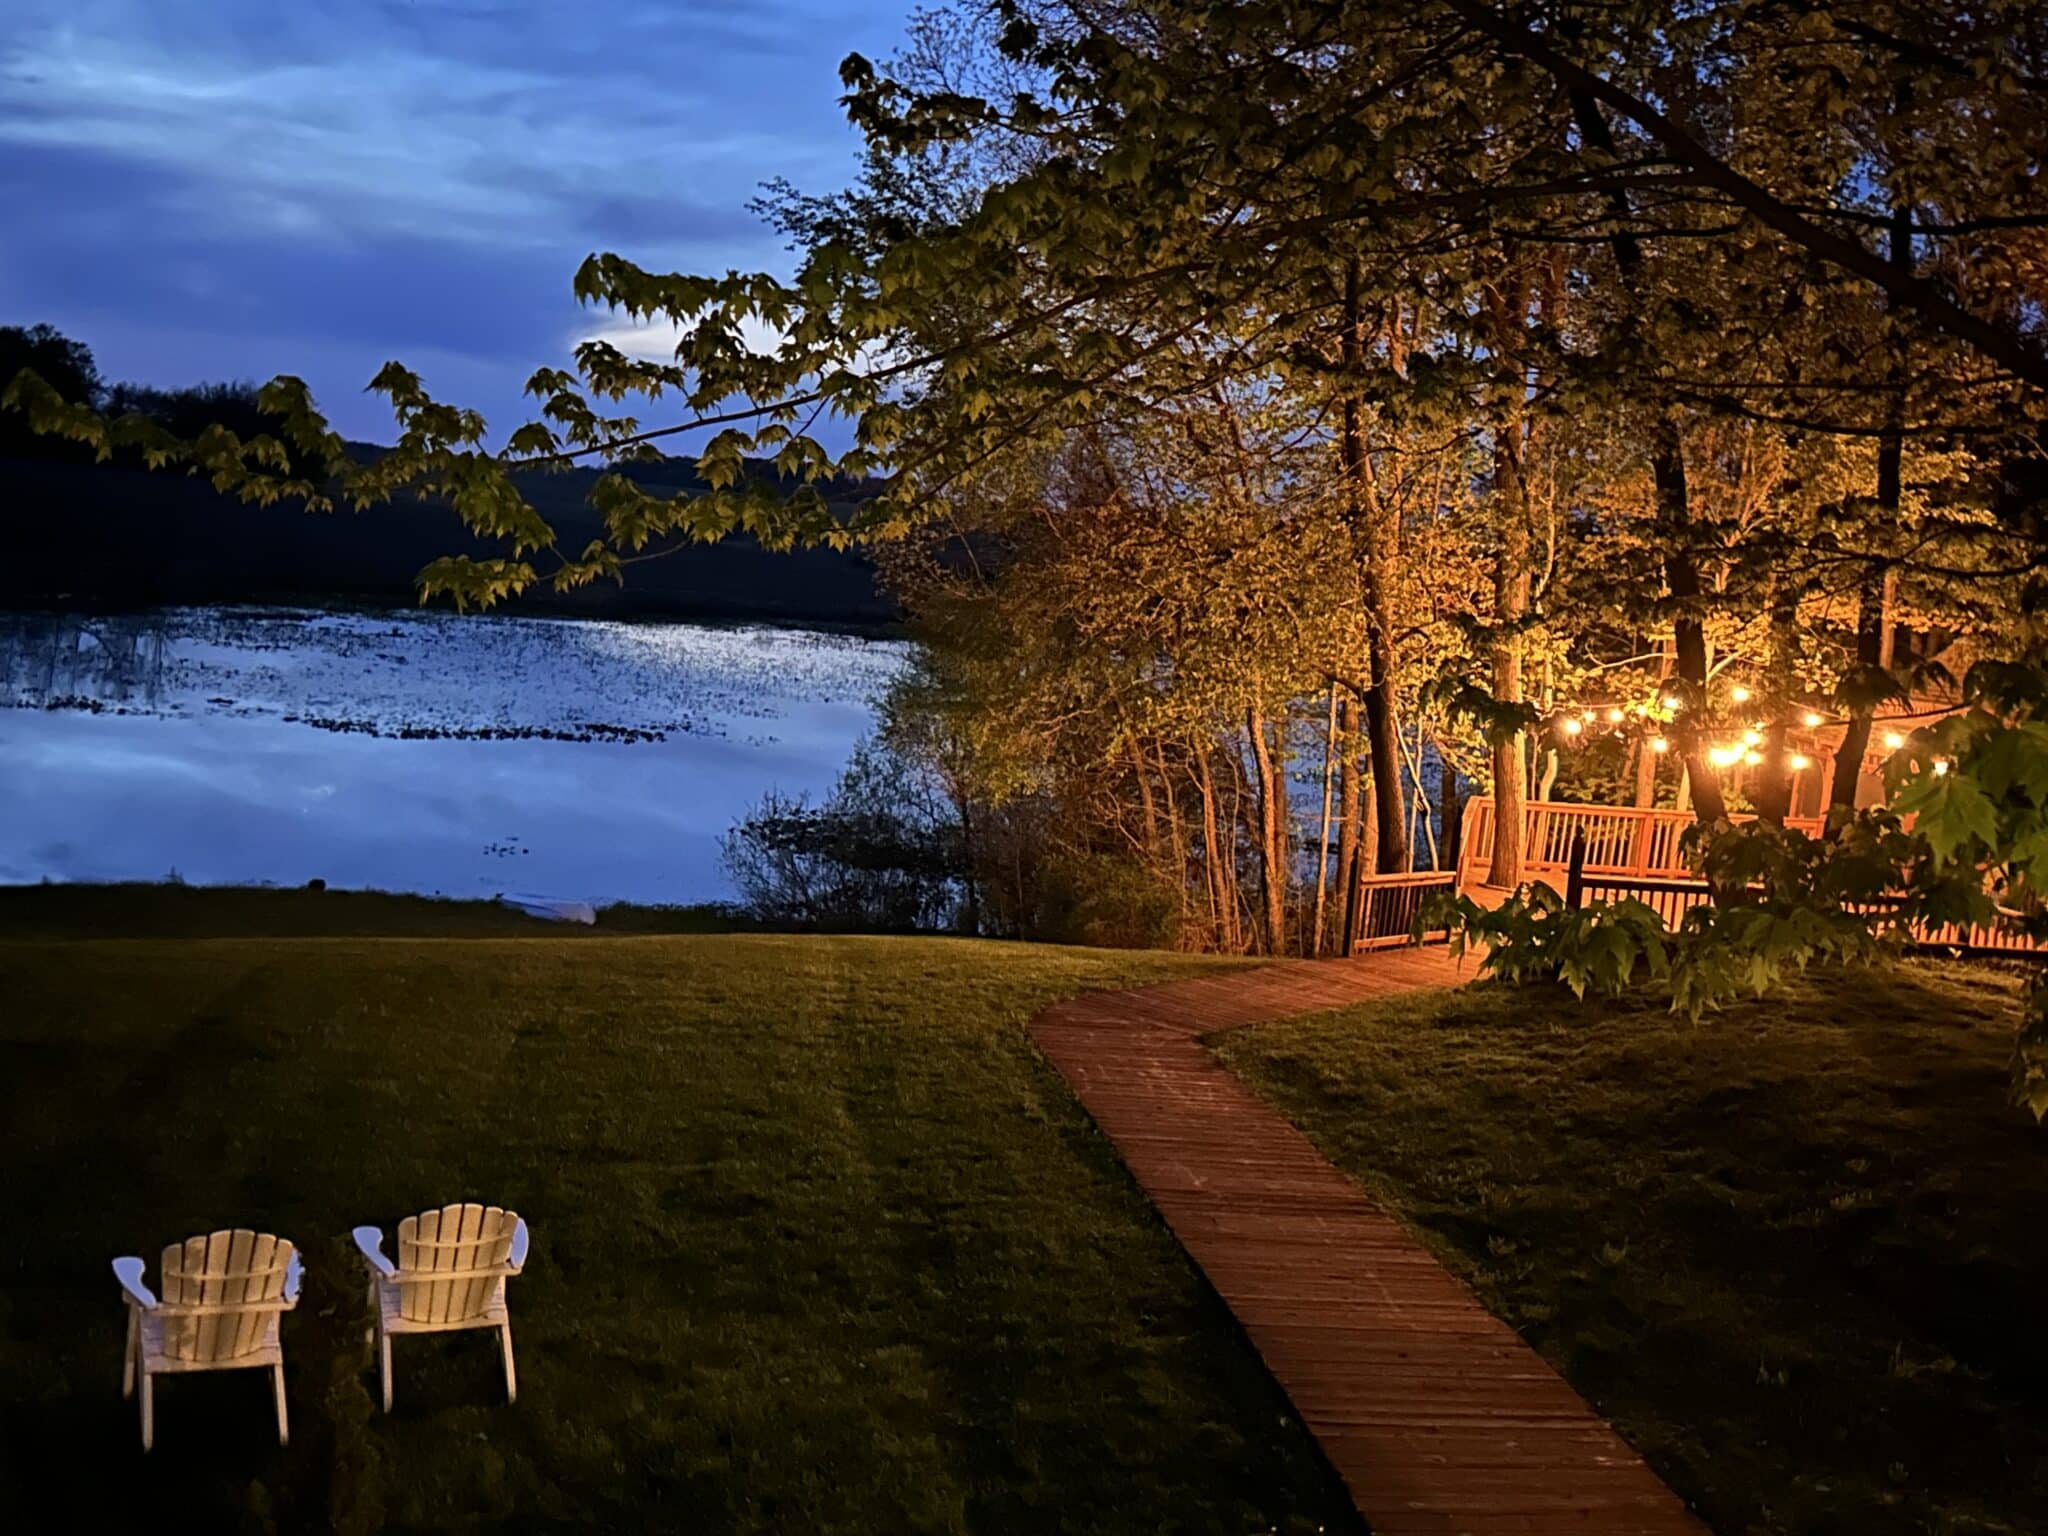 Overlooking the pond at dusk with adirondack chairs